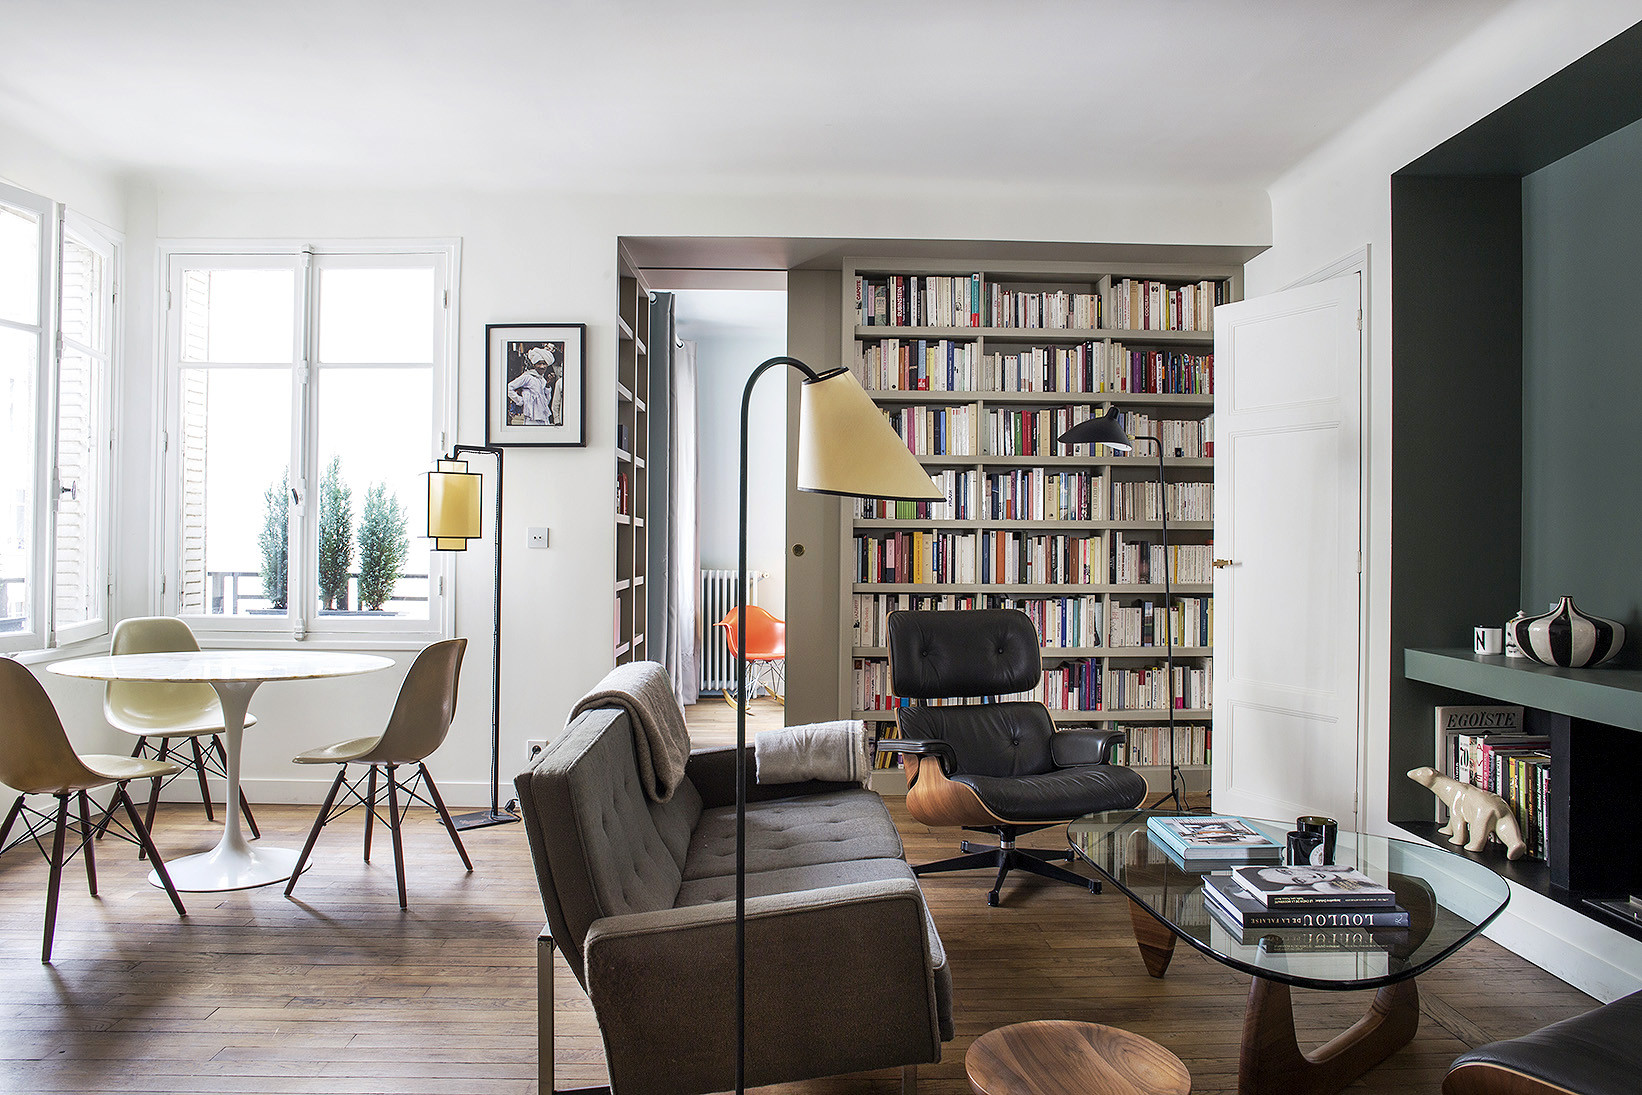 Paris Living Room Decor
 9 Small Space Ideas to Steal from a Tiny Paris Apartment